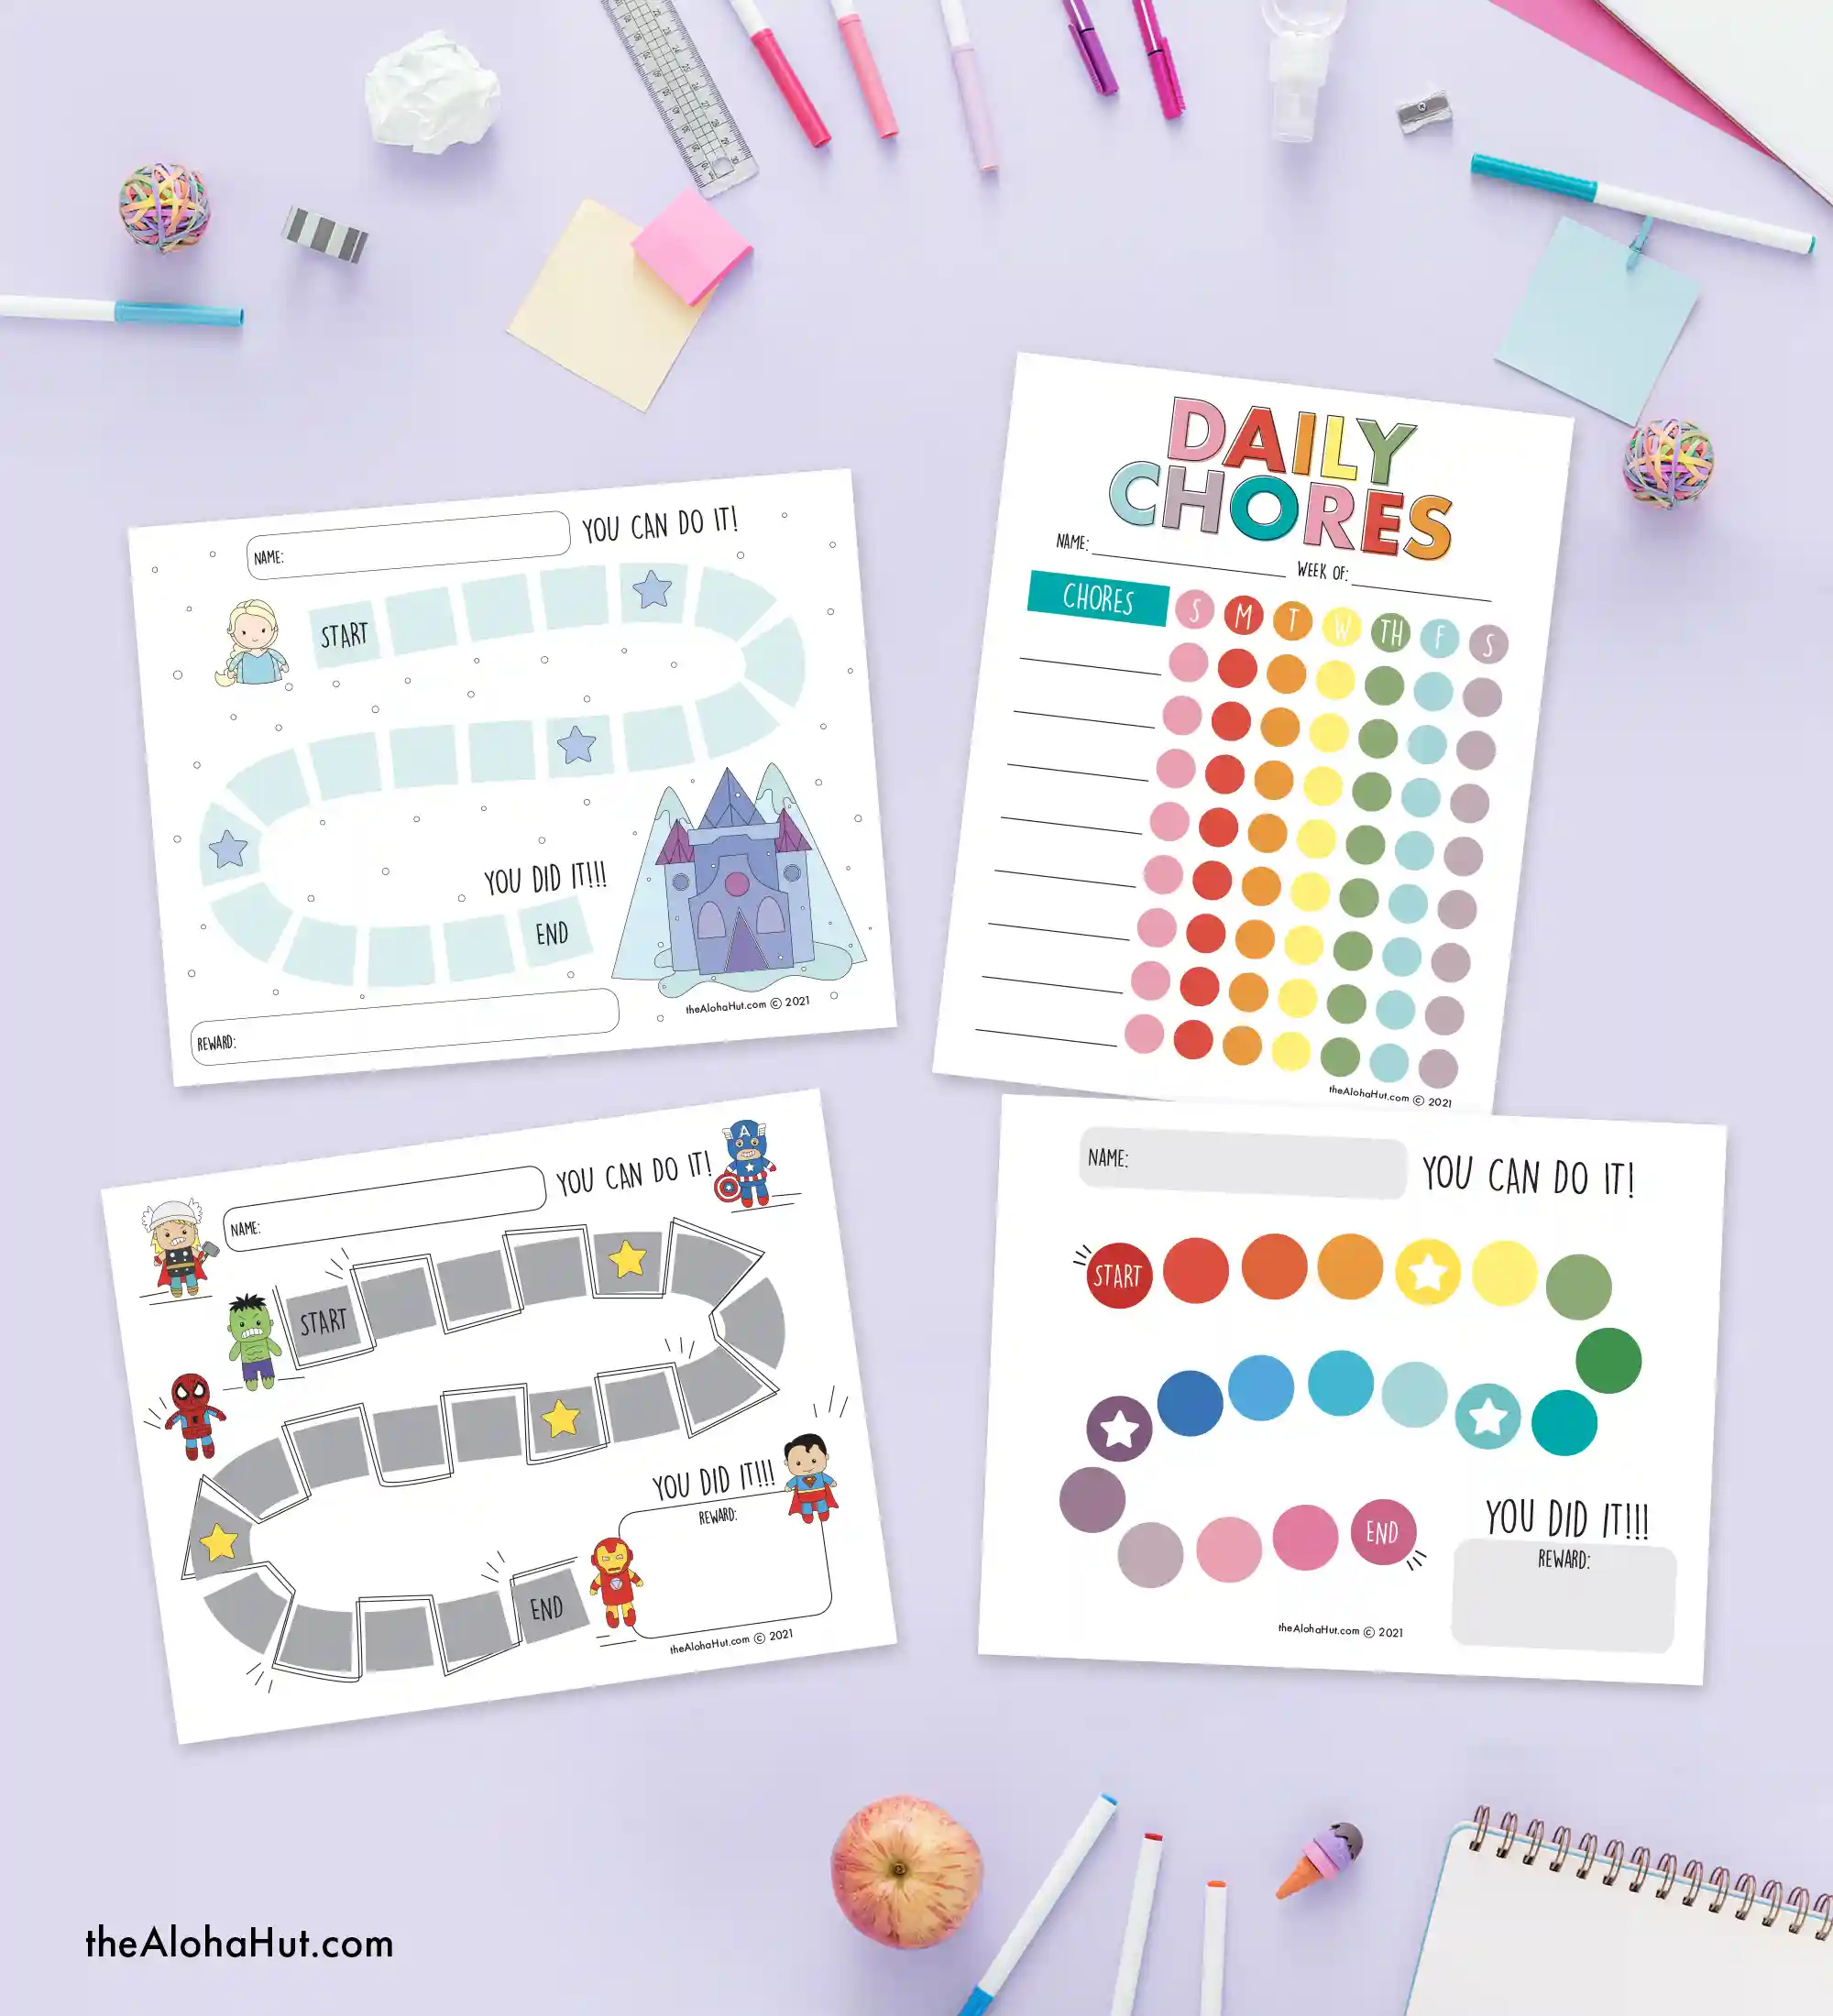 Help kids set, keep, and track goals with a daily reward chart and daily chores tracker checklist. Includes princess, superhero, and rainbow reward chart plus a daily charts list for kids to personalize and track each week.